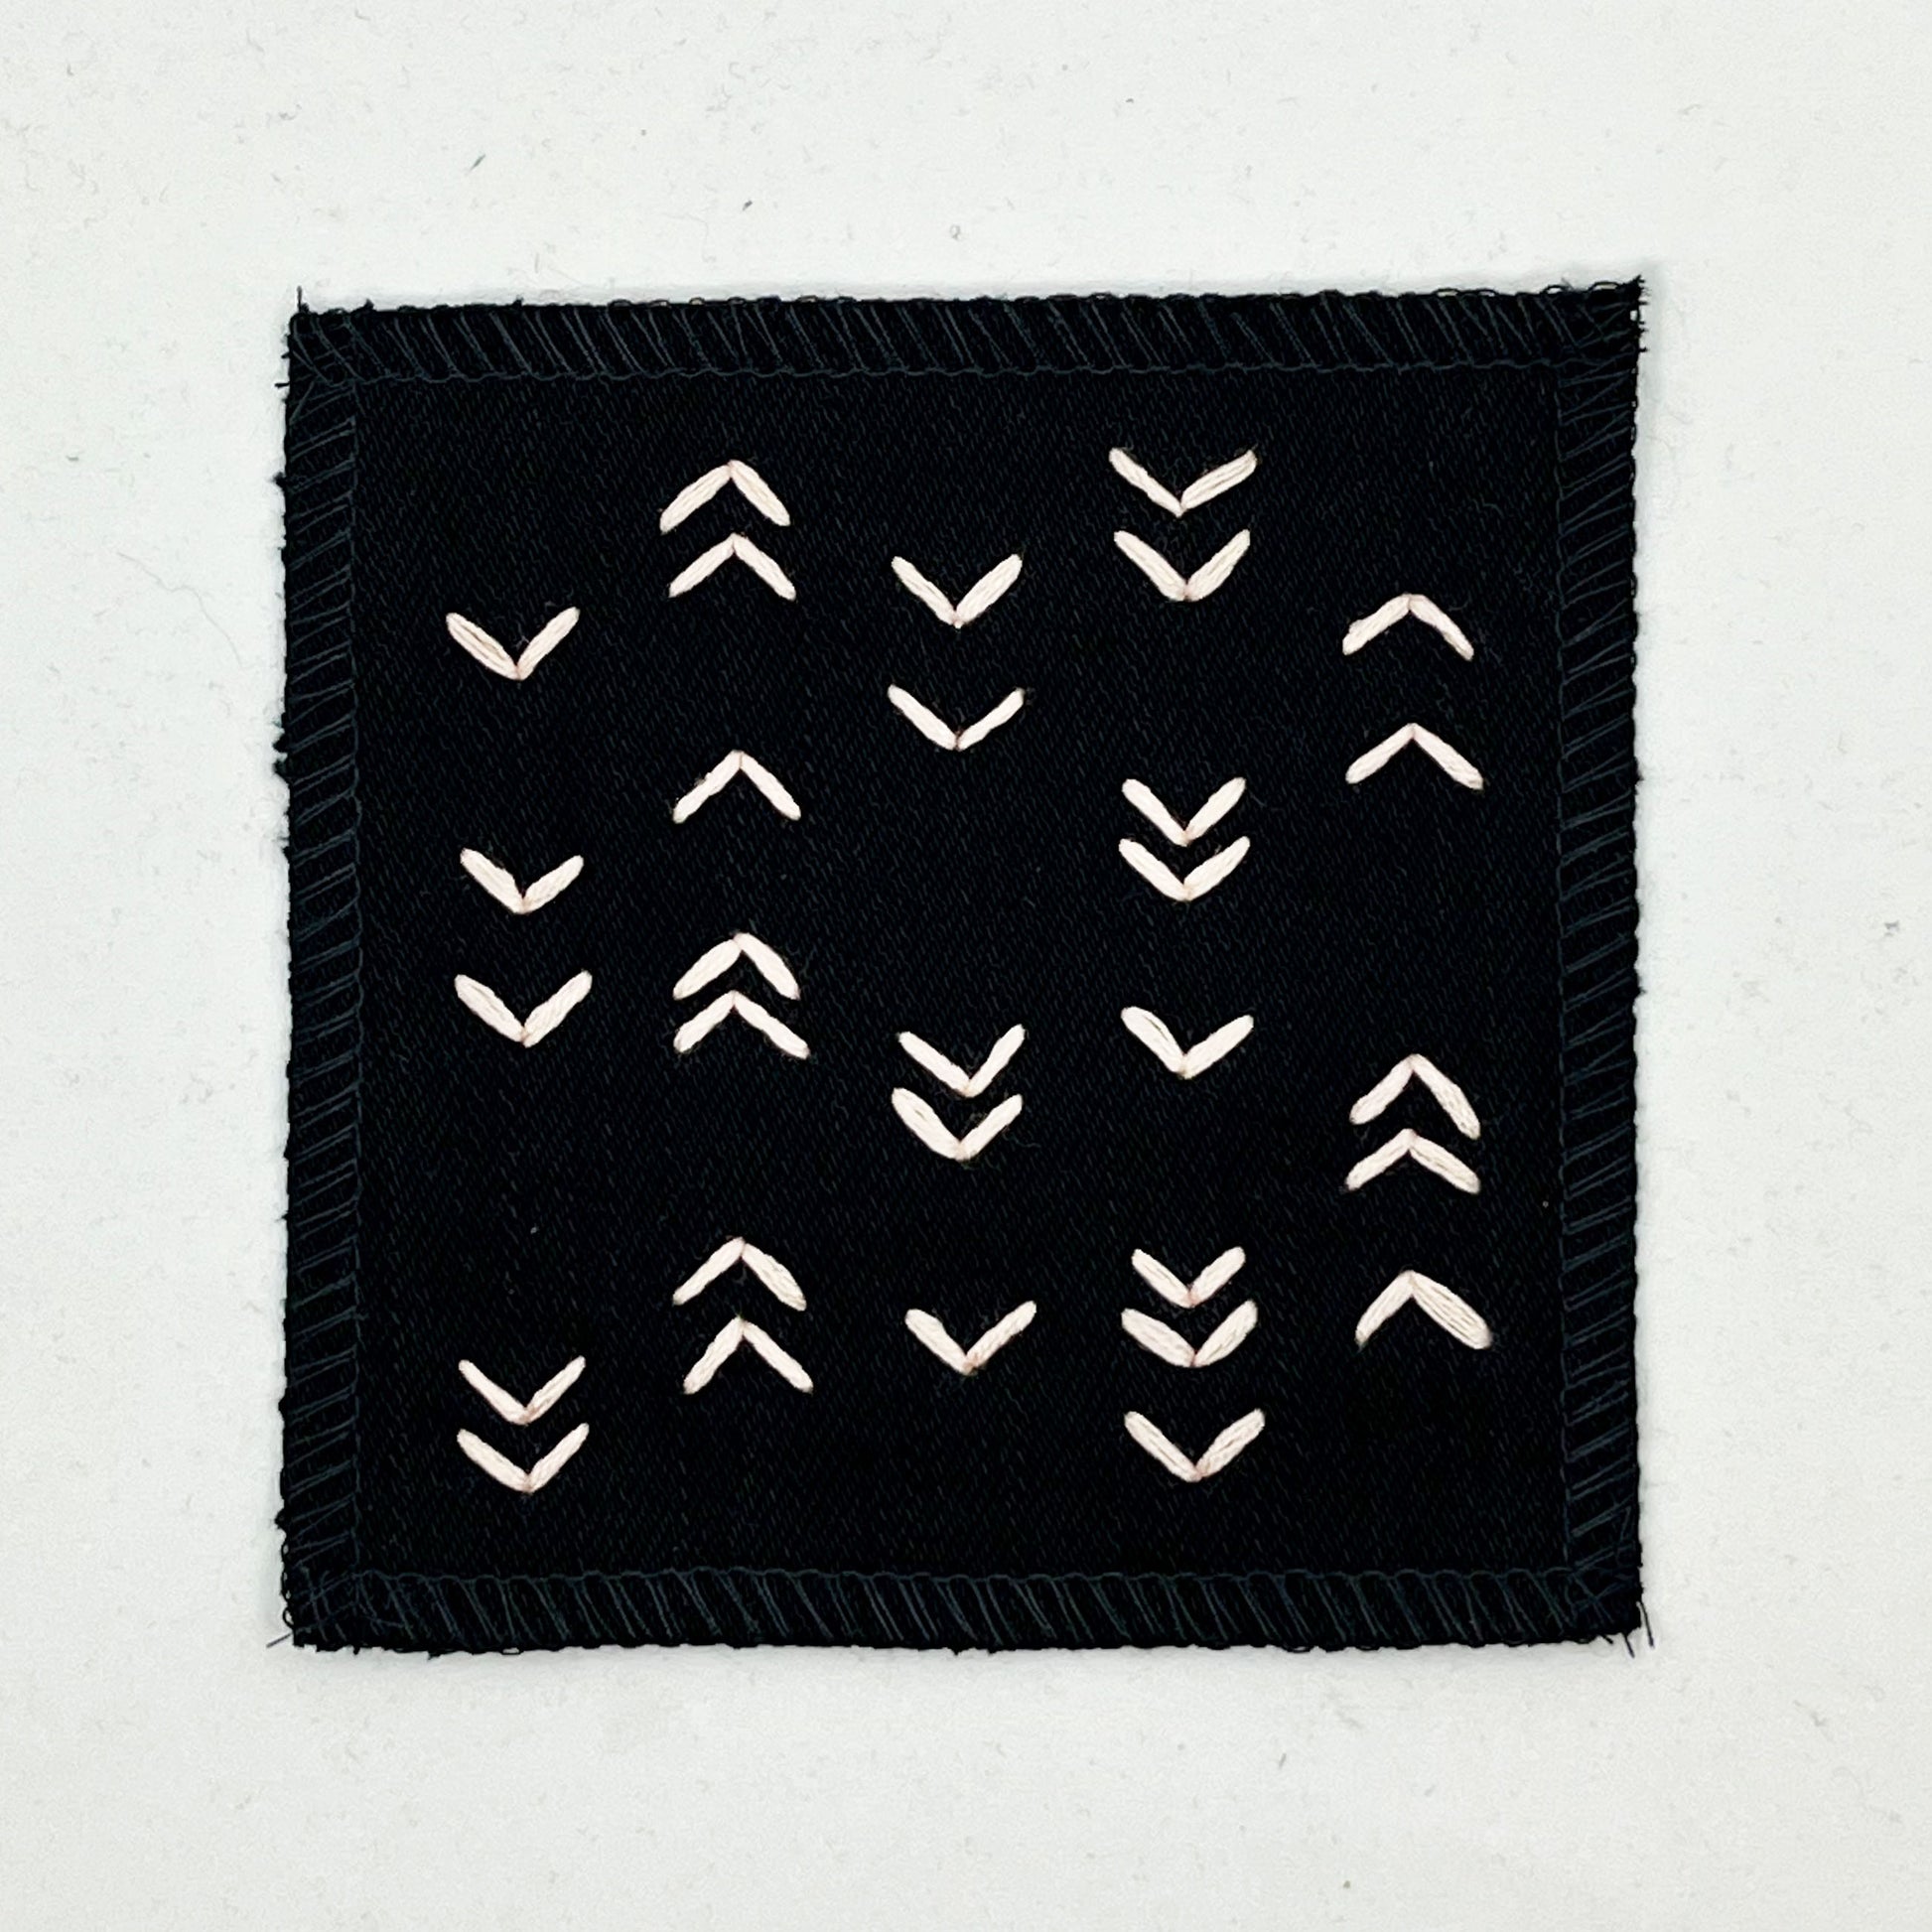 a square black denim patch hand stitched in peach with rows of unevenly spaced small chevrons facing different directions on a white background